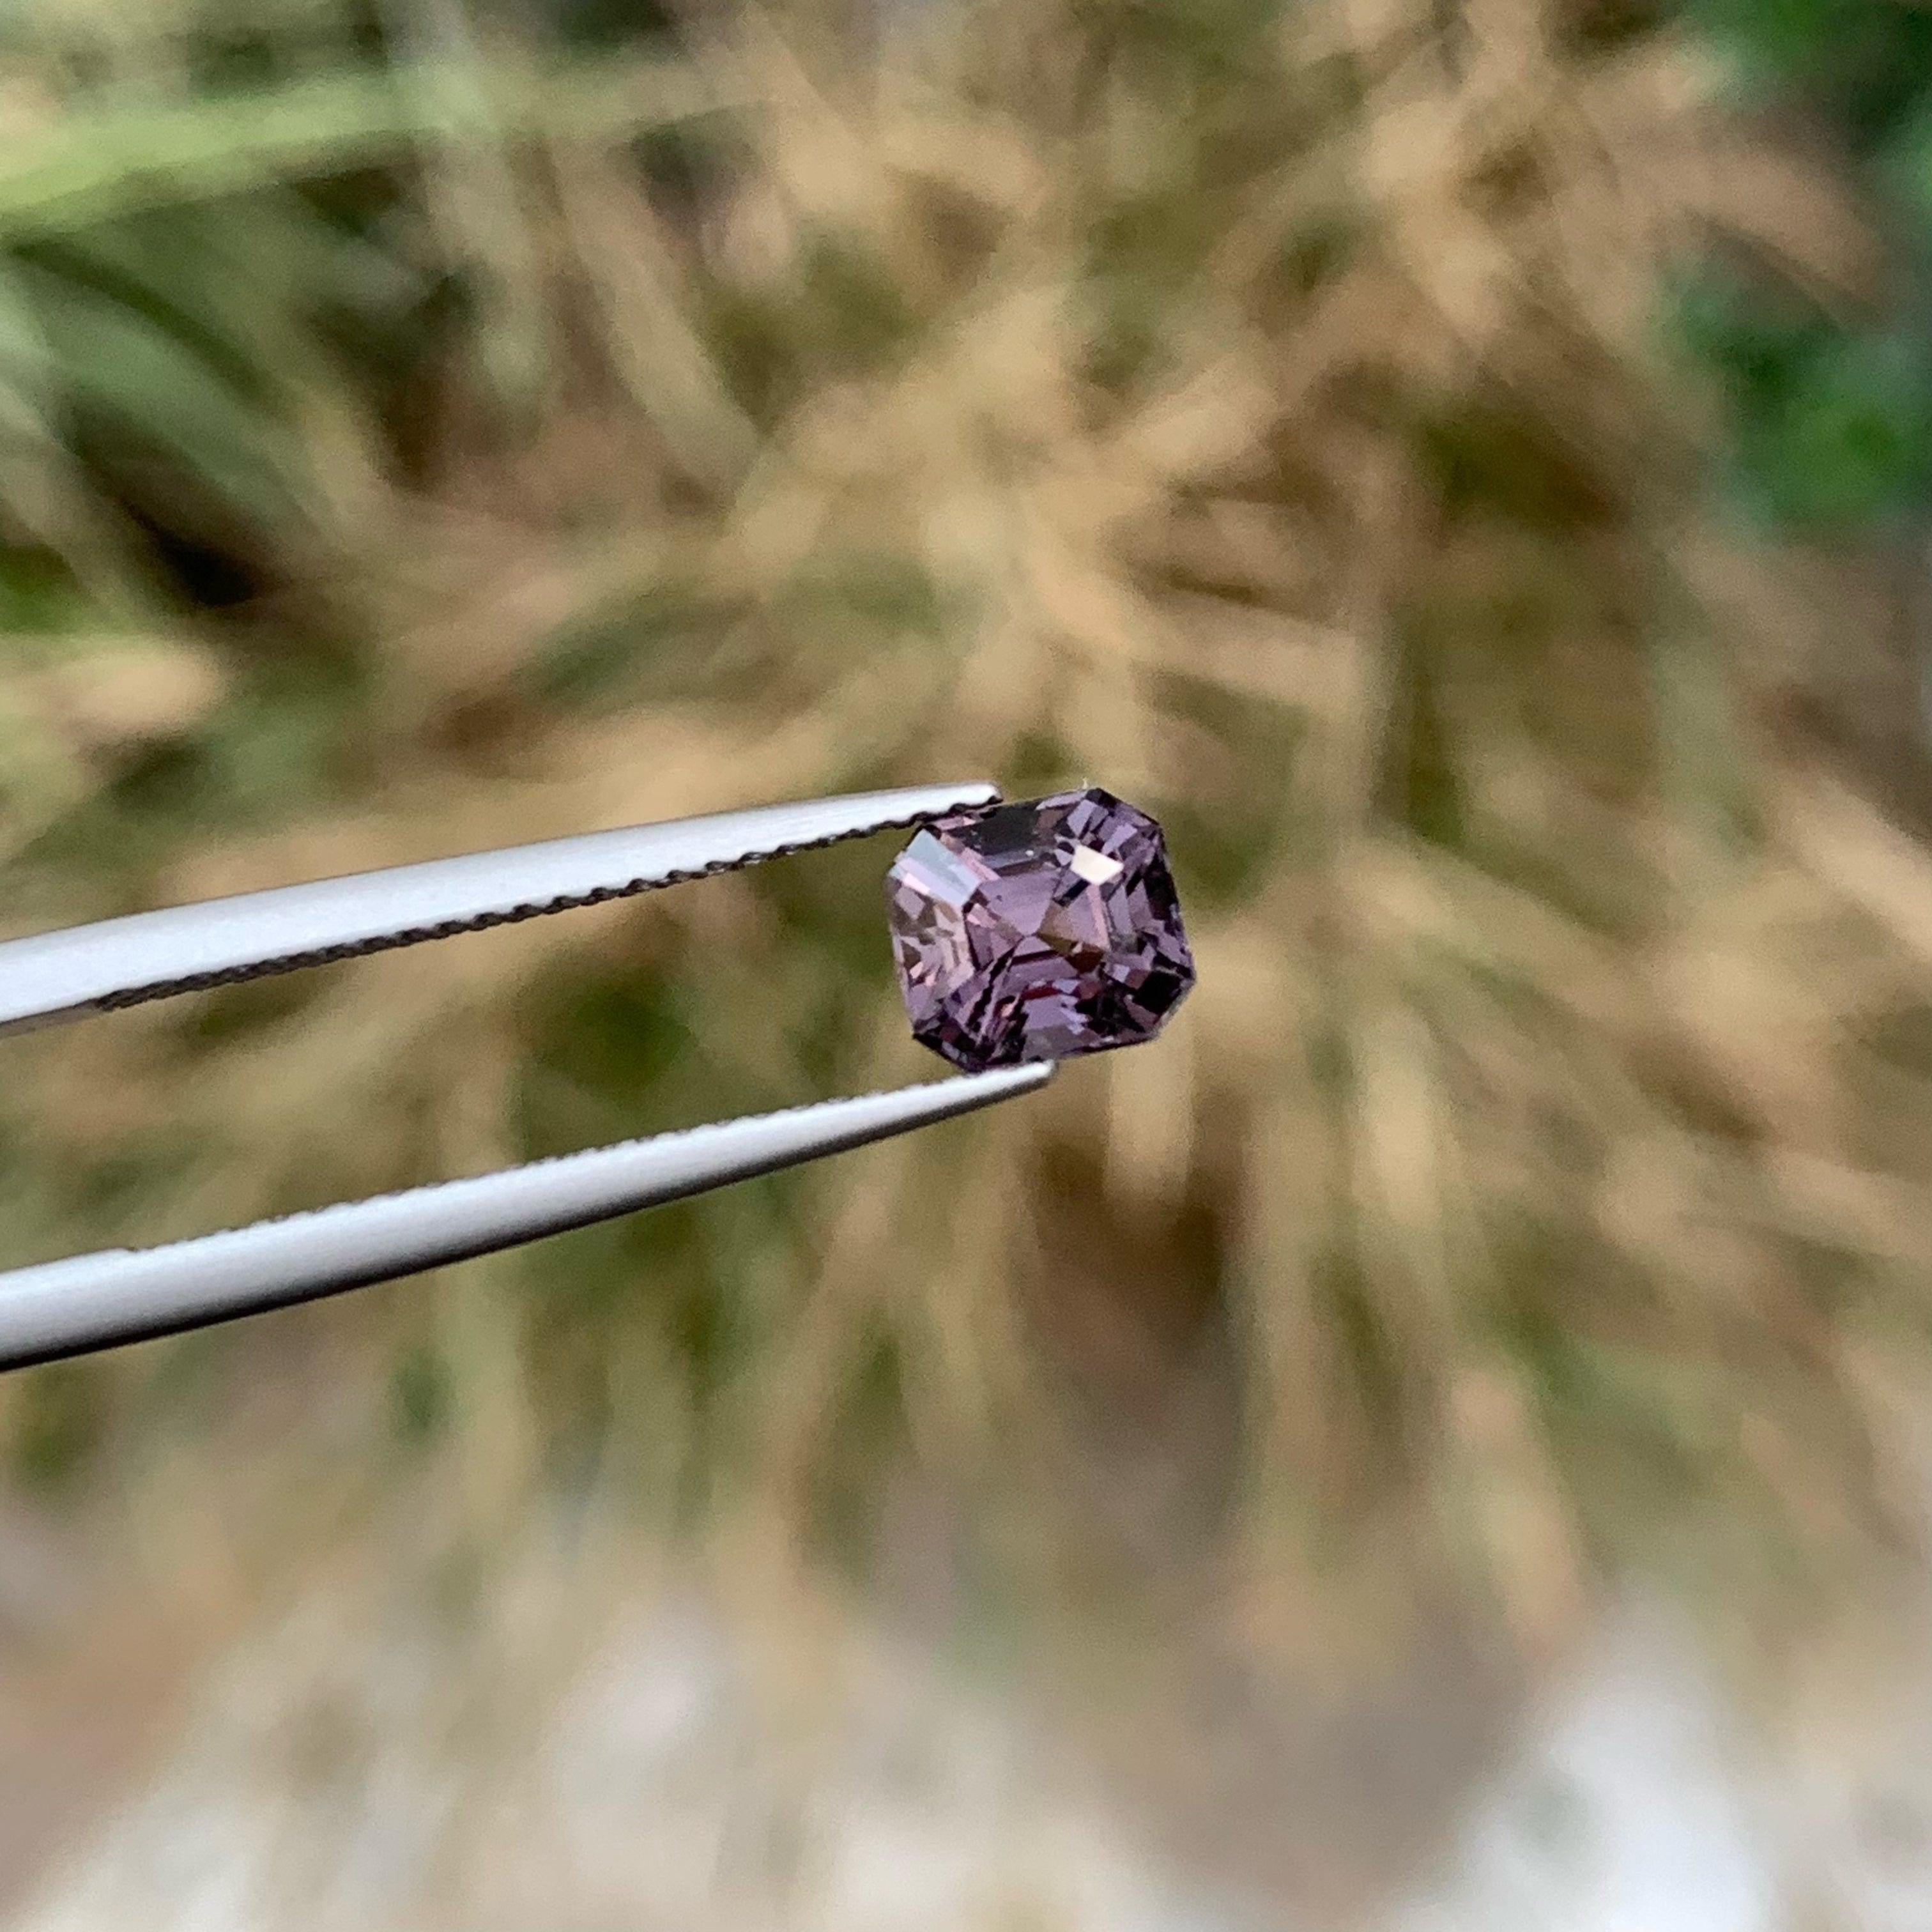 Fantastic Greyish Purple Spinel Gemstone , Available For Sale At Wholesale Price Natural High Quality 1.45 Carats SI Clarity Natural Spinel from Burma.

Product Information:
GEMSTONE TYPE:	Fantastic Greyish Purple Spinel Gemstone
WEIGHT:	1.45